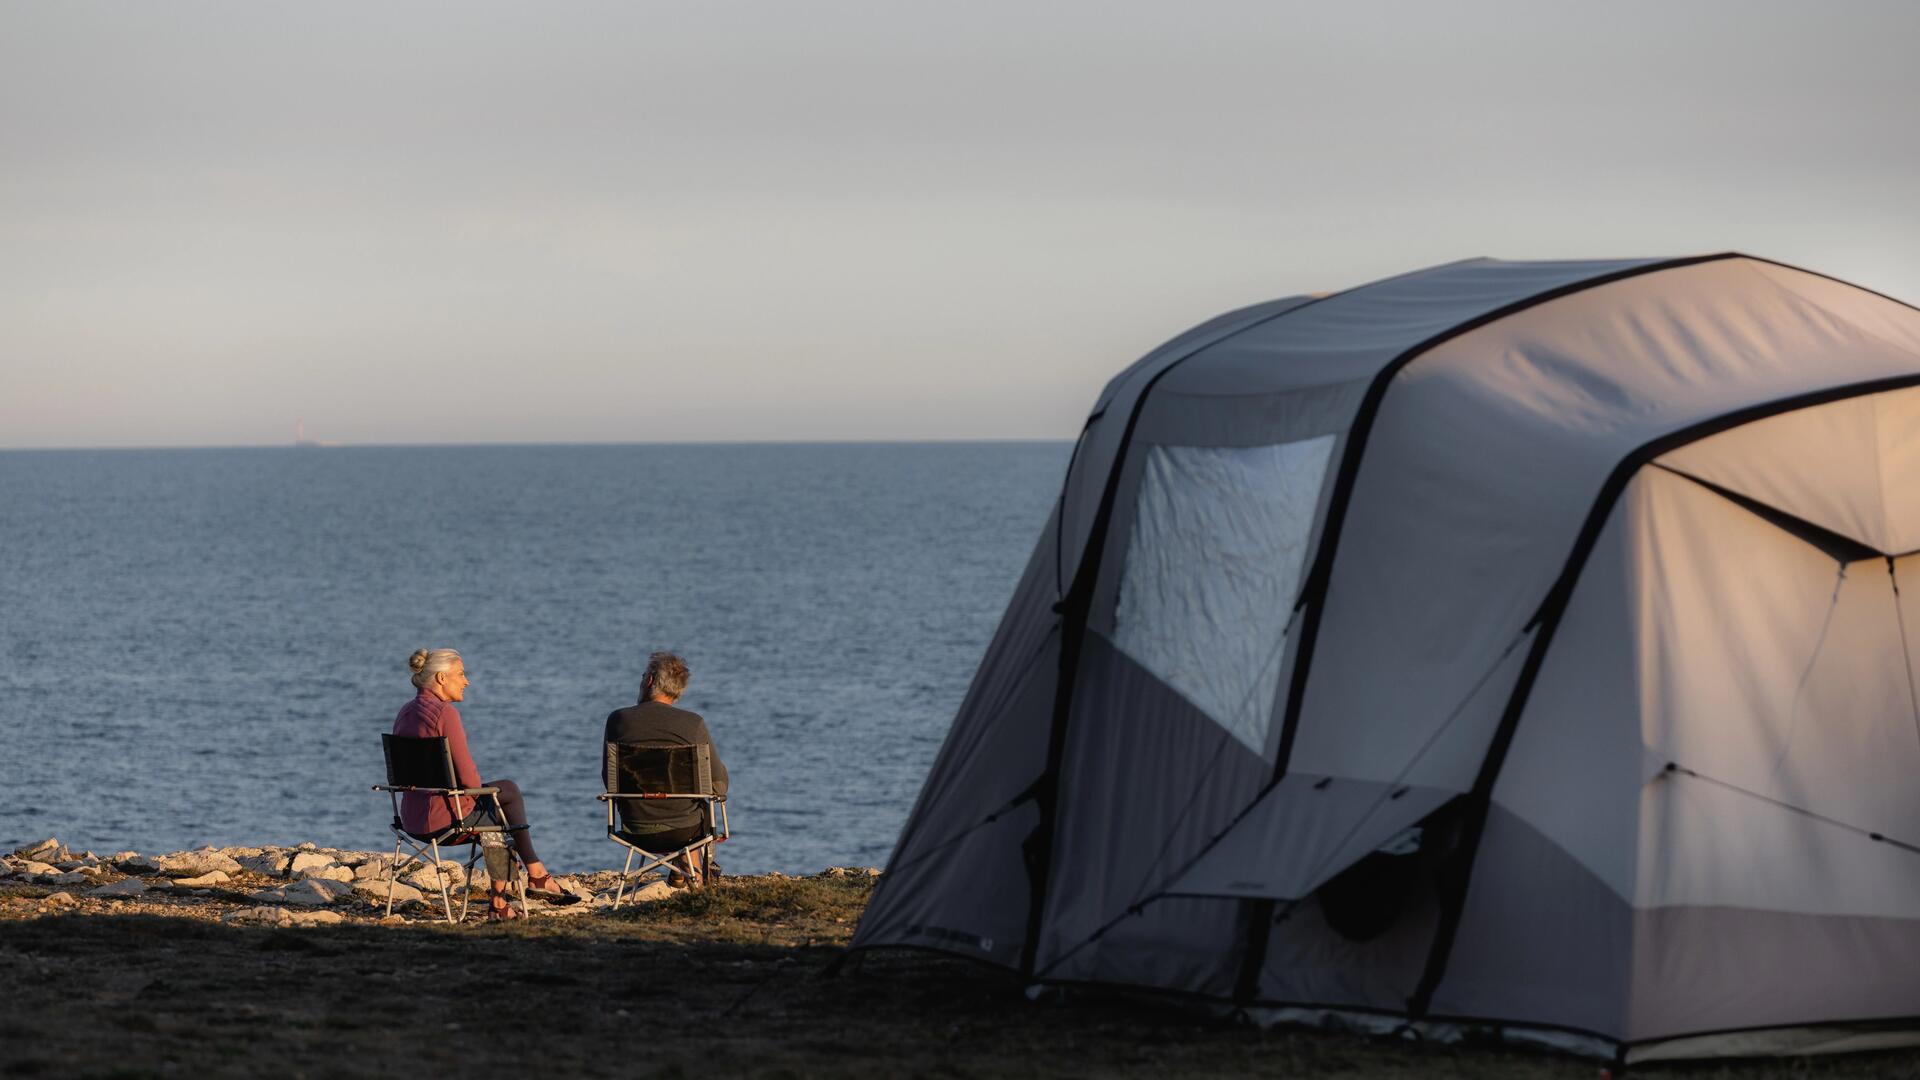 QUECHUA TENTS: It’s never been so easy to sleep outdoors!